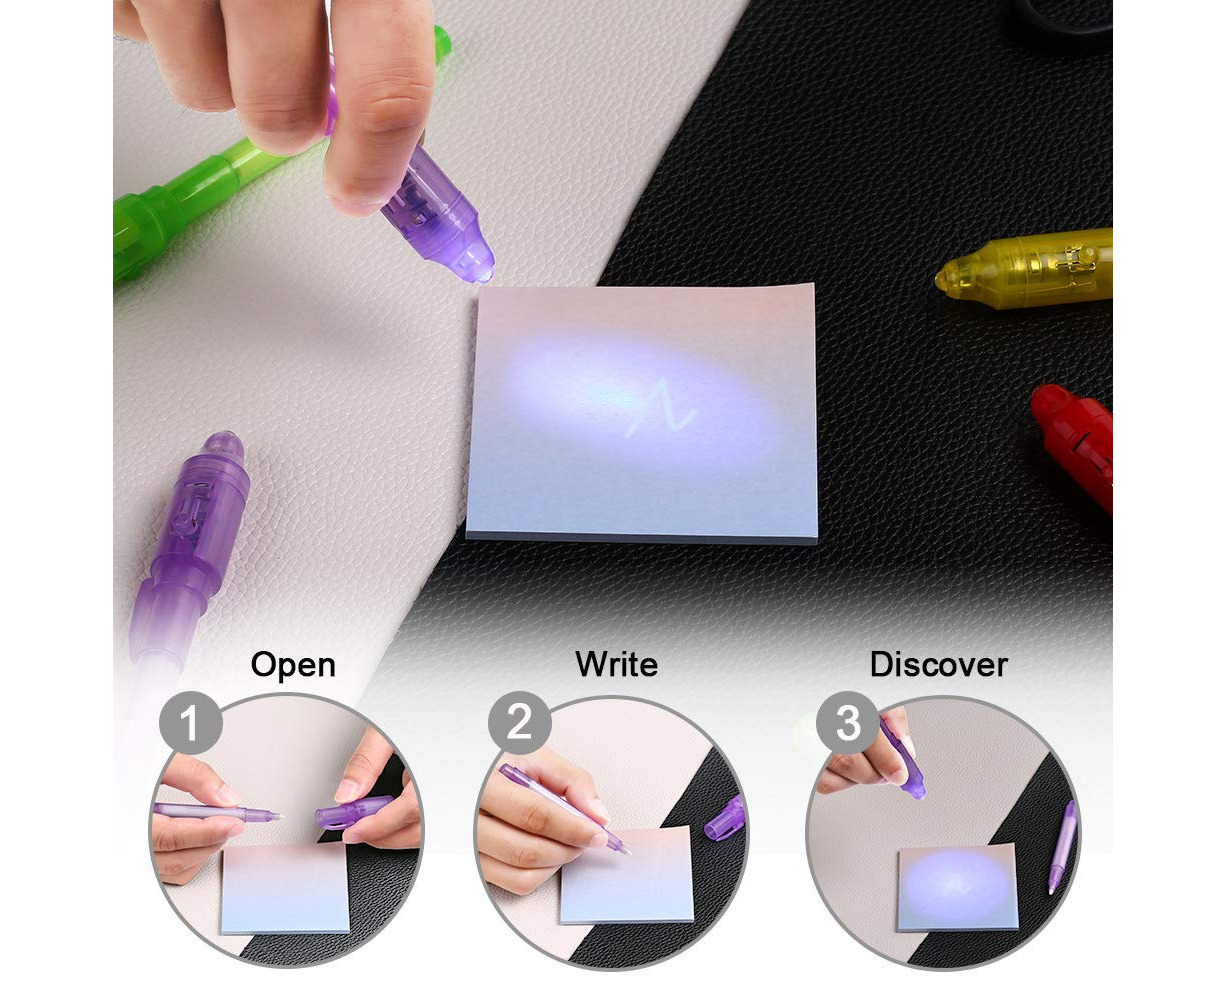 SCStyle Invisible Ink Pen 28pcs Latest Spy Pen with UV Light Magic Spy Marker Kid Pens for Secret Birthday Message Party,Writing